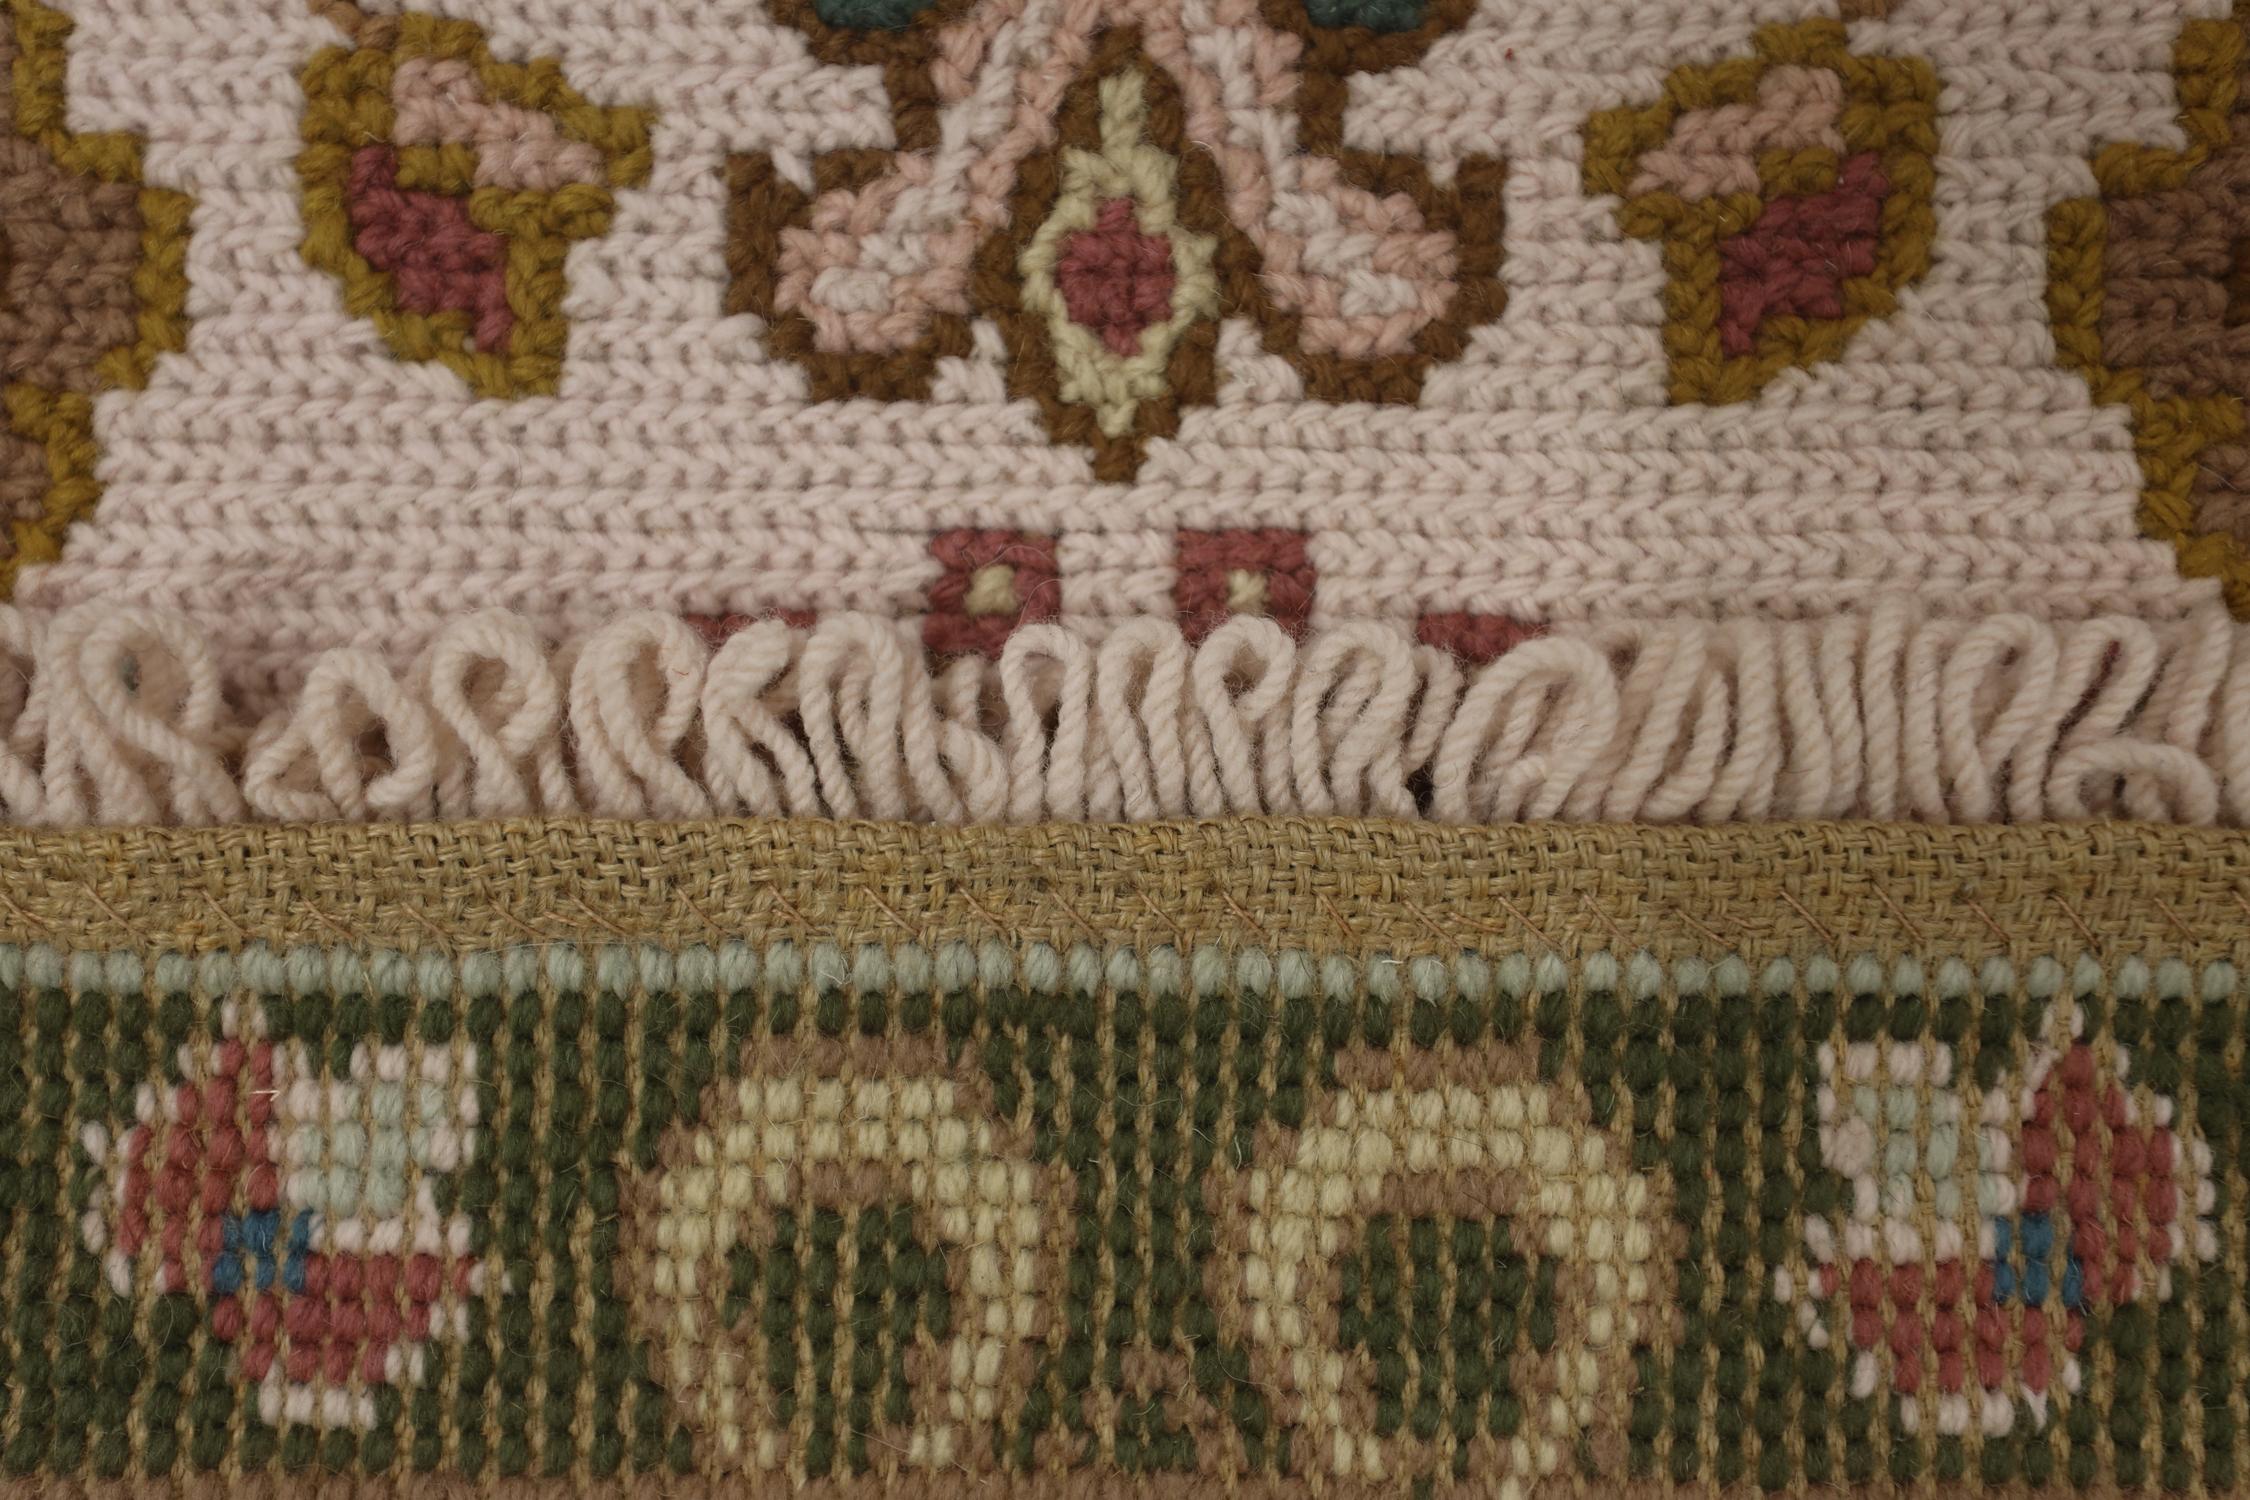 Portuguese Needlepoint Rug Traditional Wool Floral Rugs Handwoven Carpet In Excellent Condition For Sale In Hampshire, GB